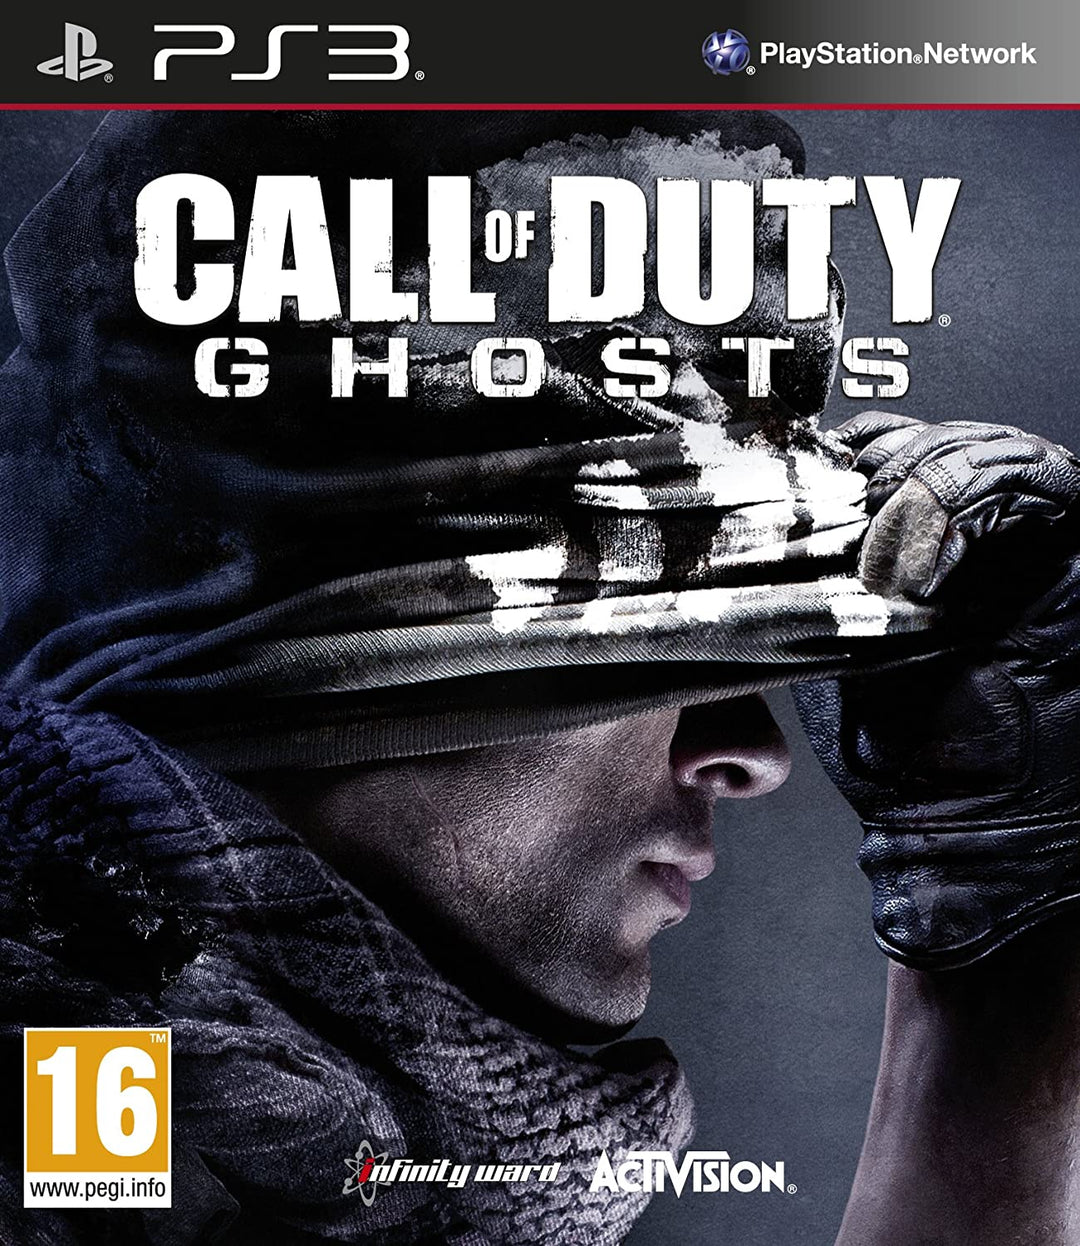 Call of Duty-Geister (PS3)